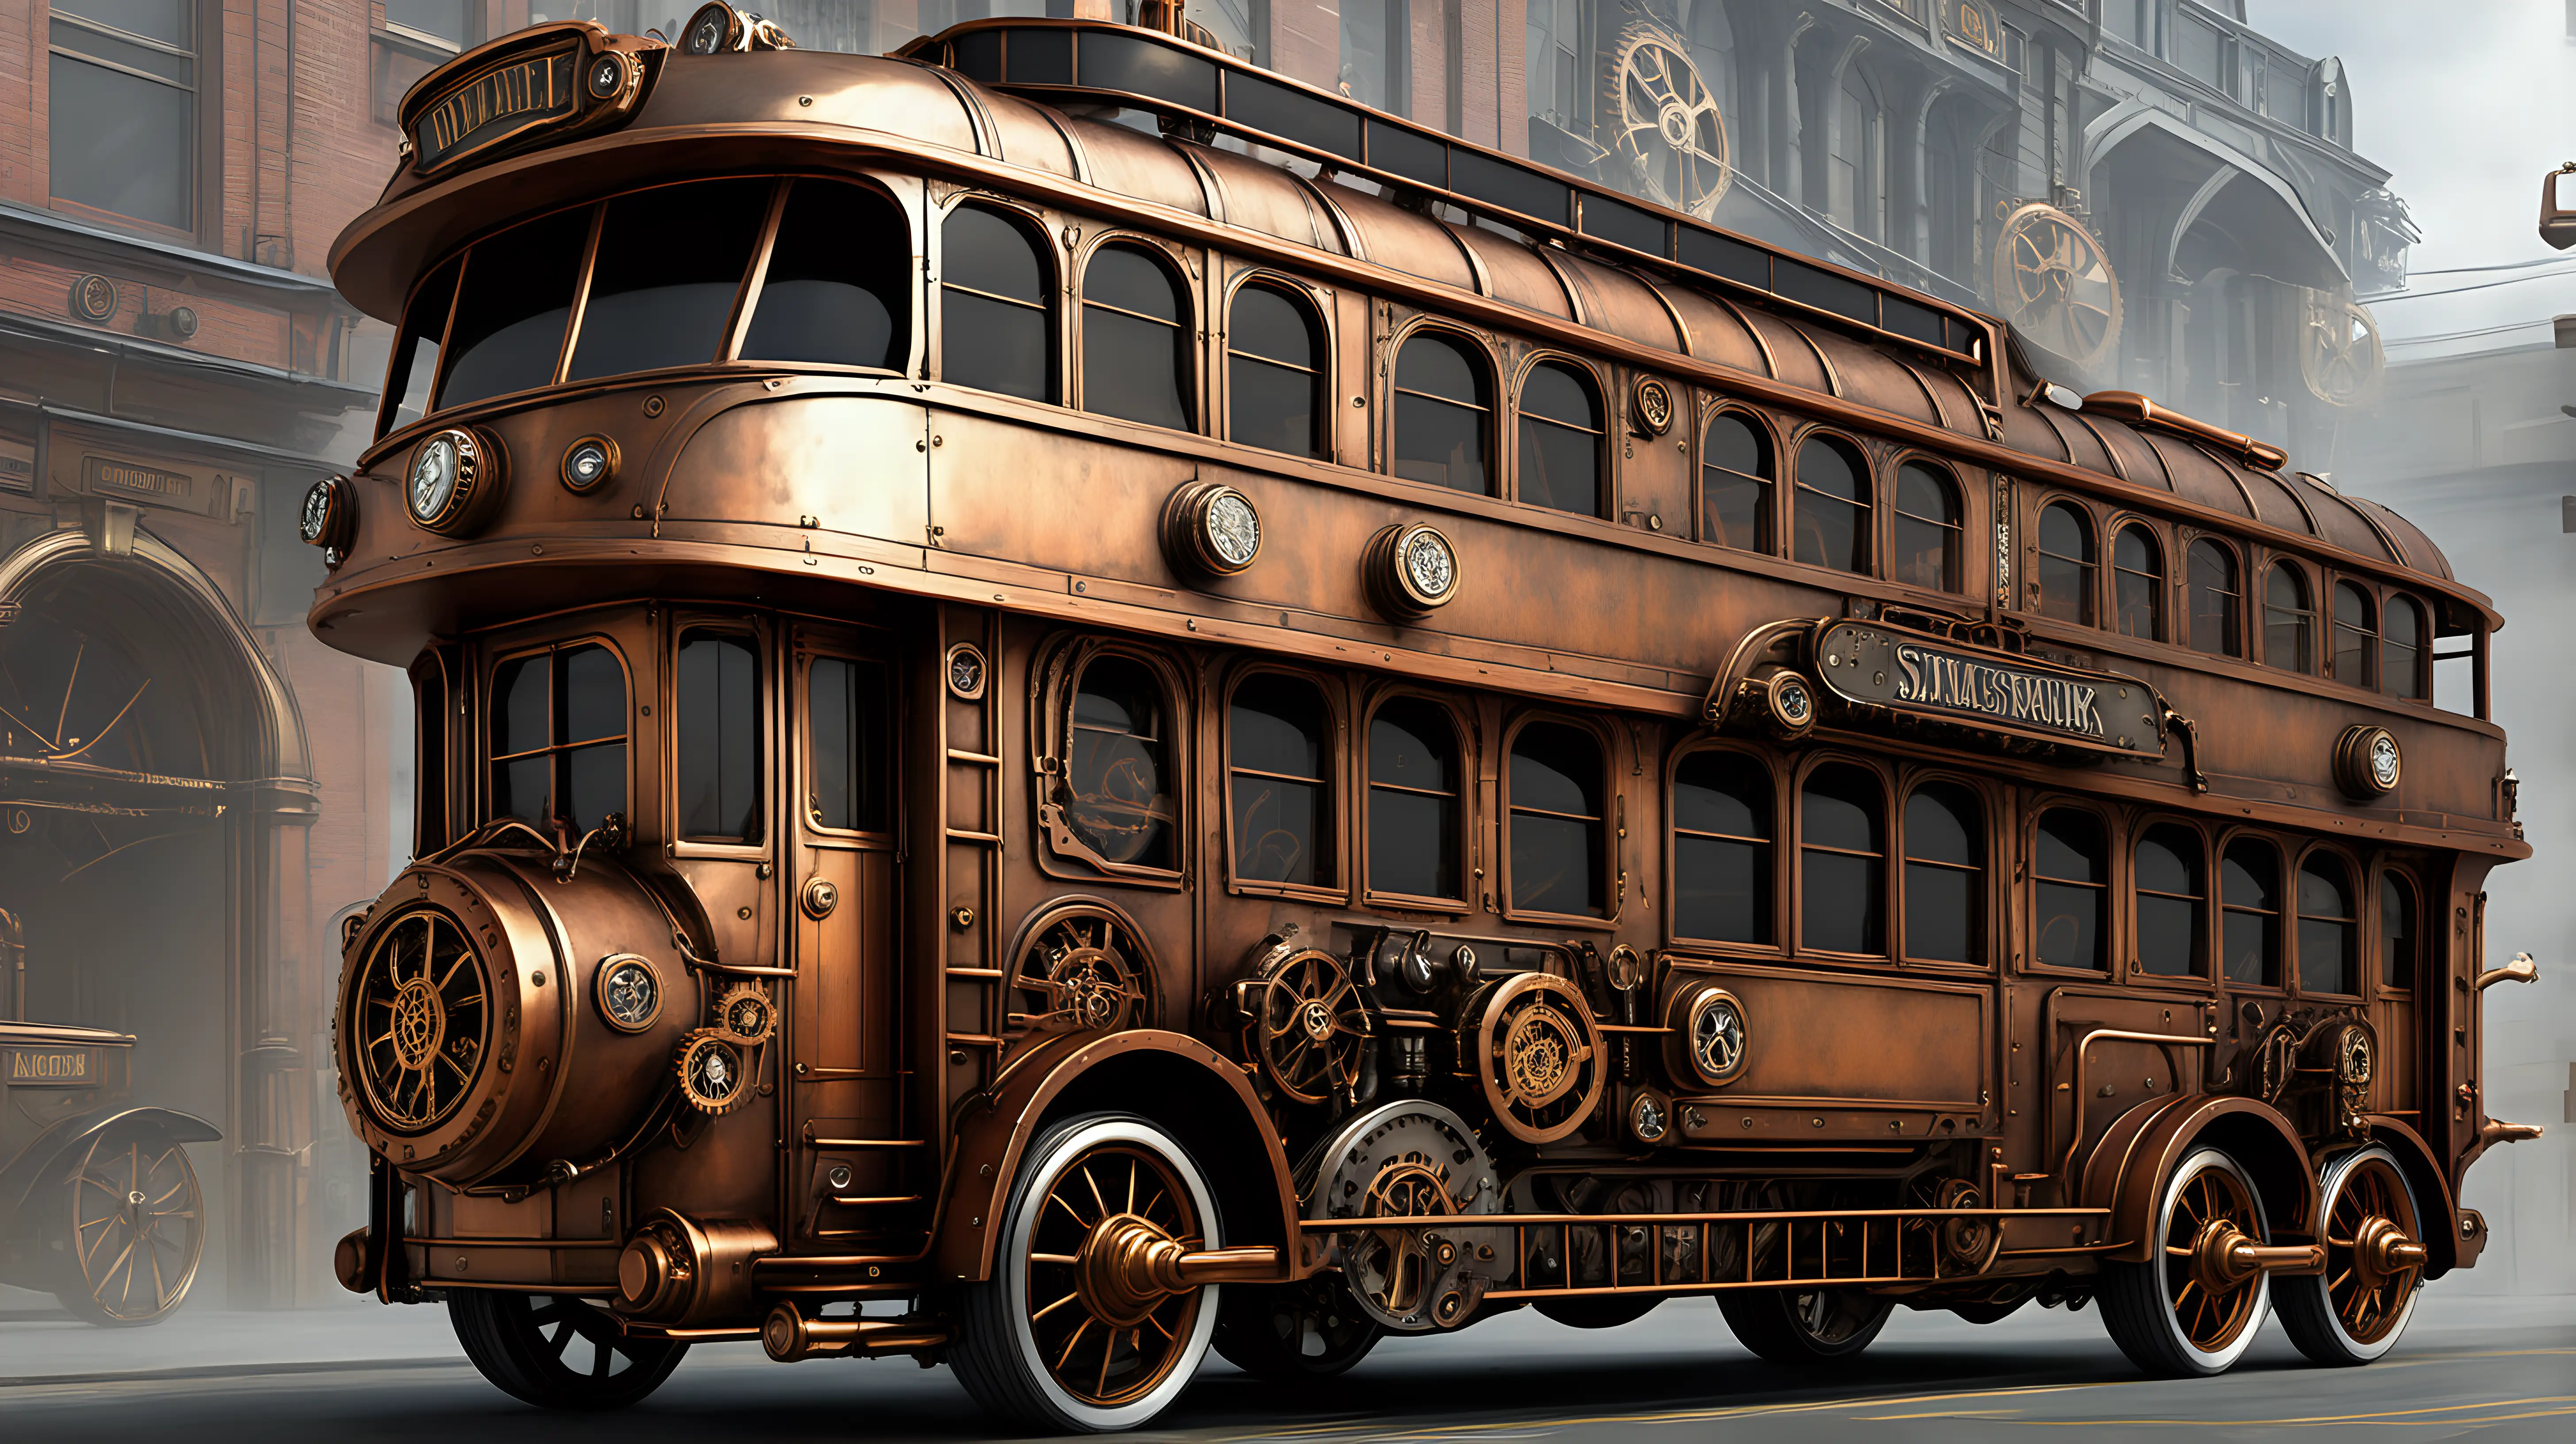 Steampunk Urban Transport Large Street Cars Buses and Trucks